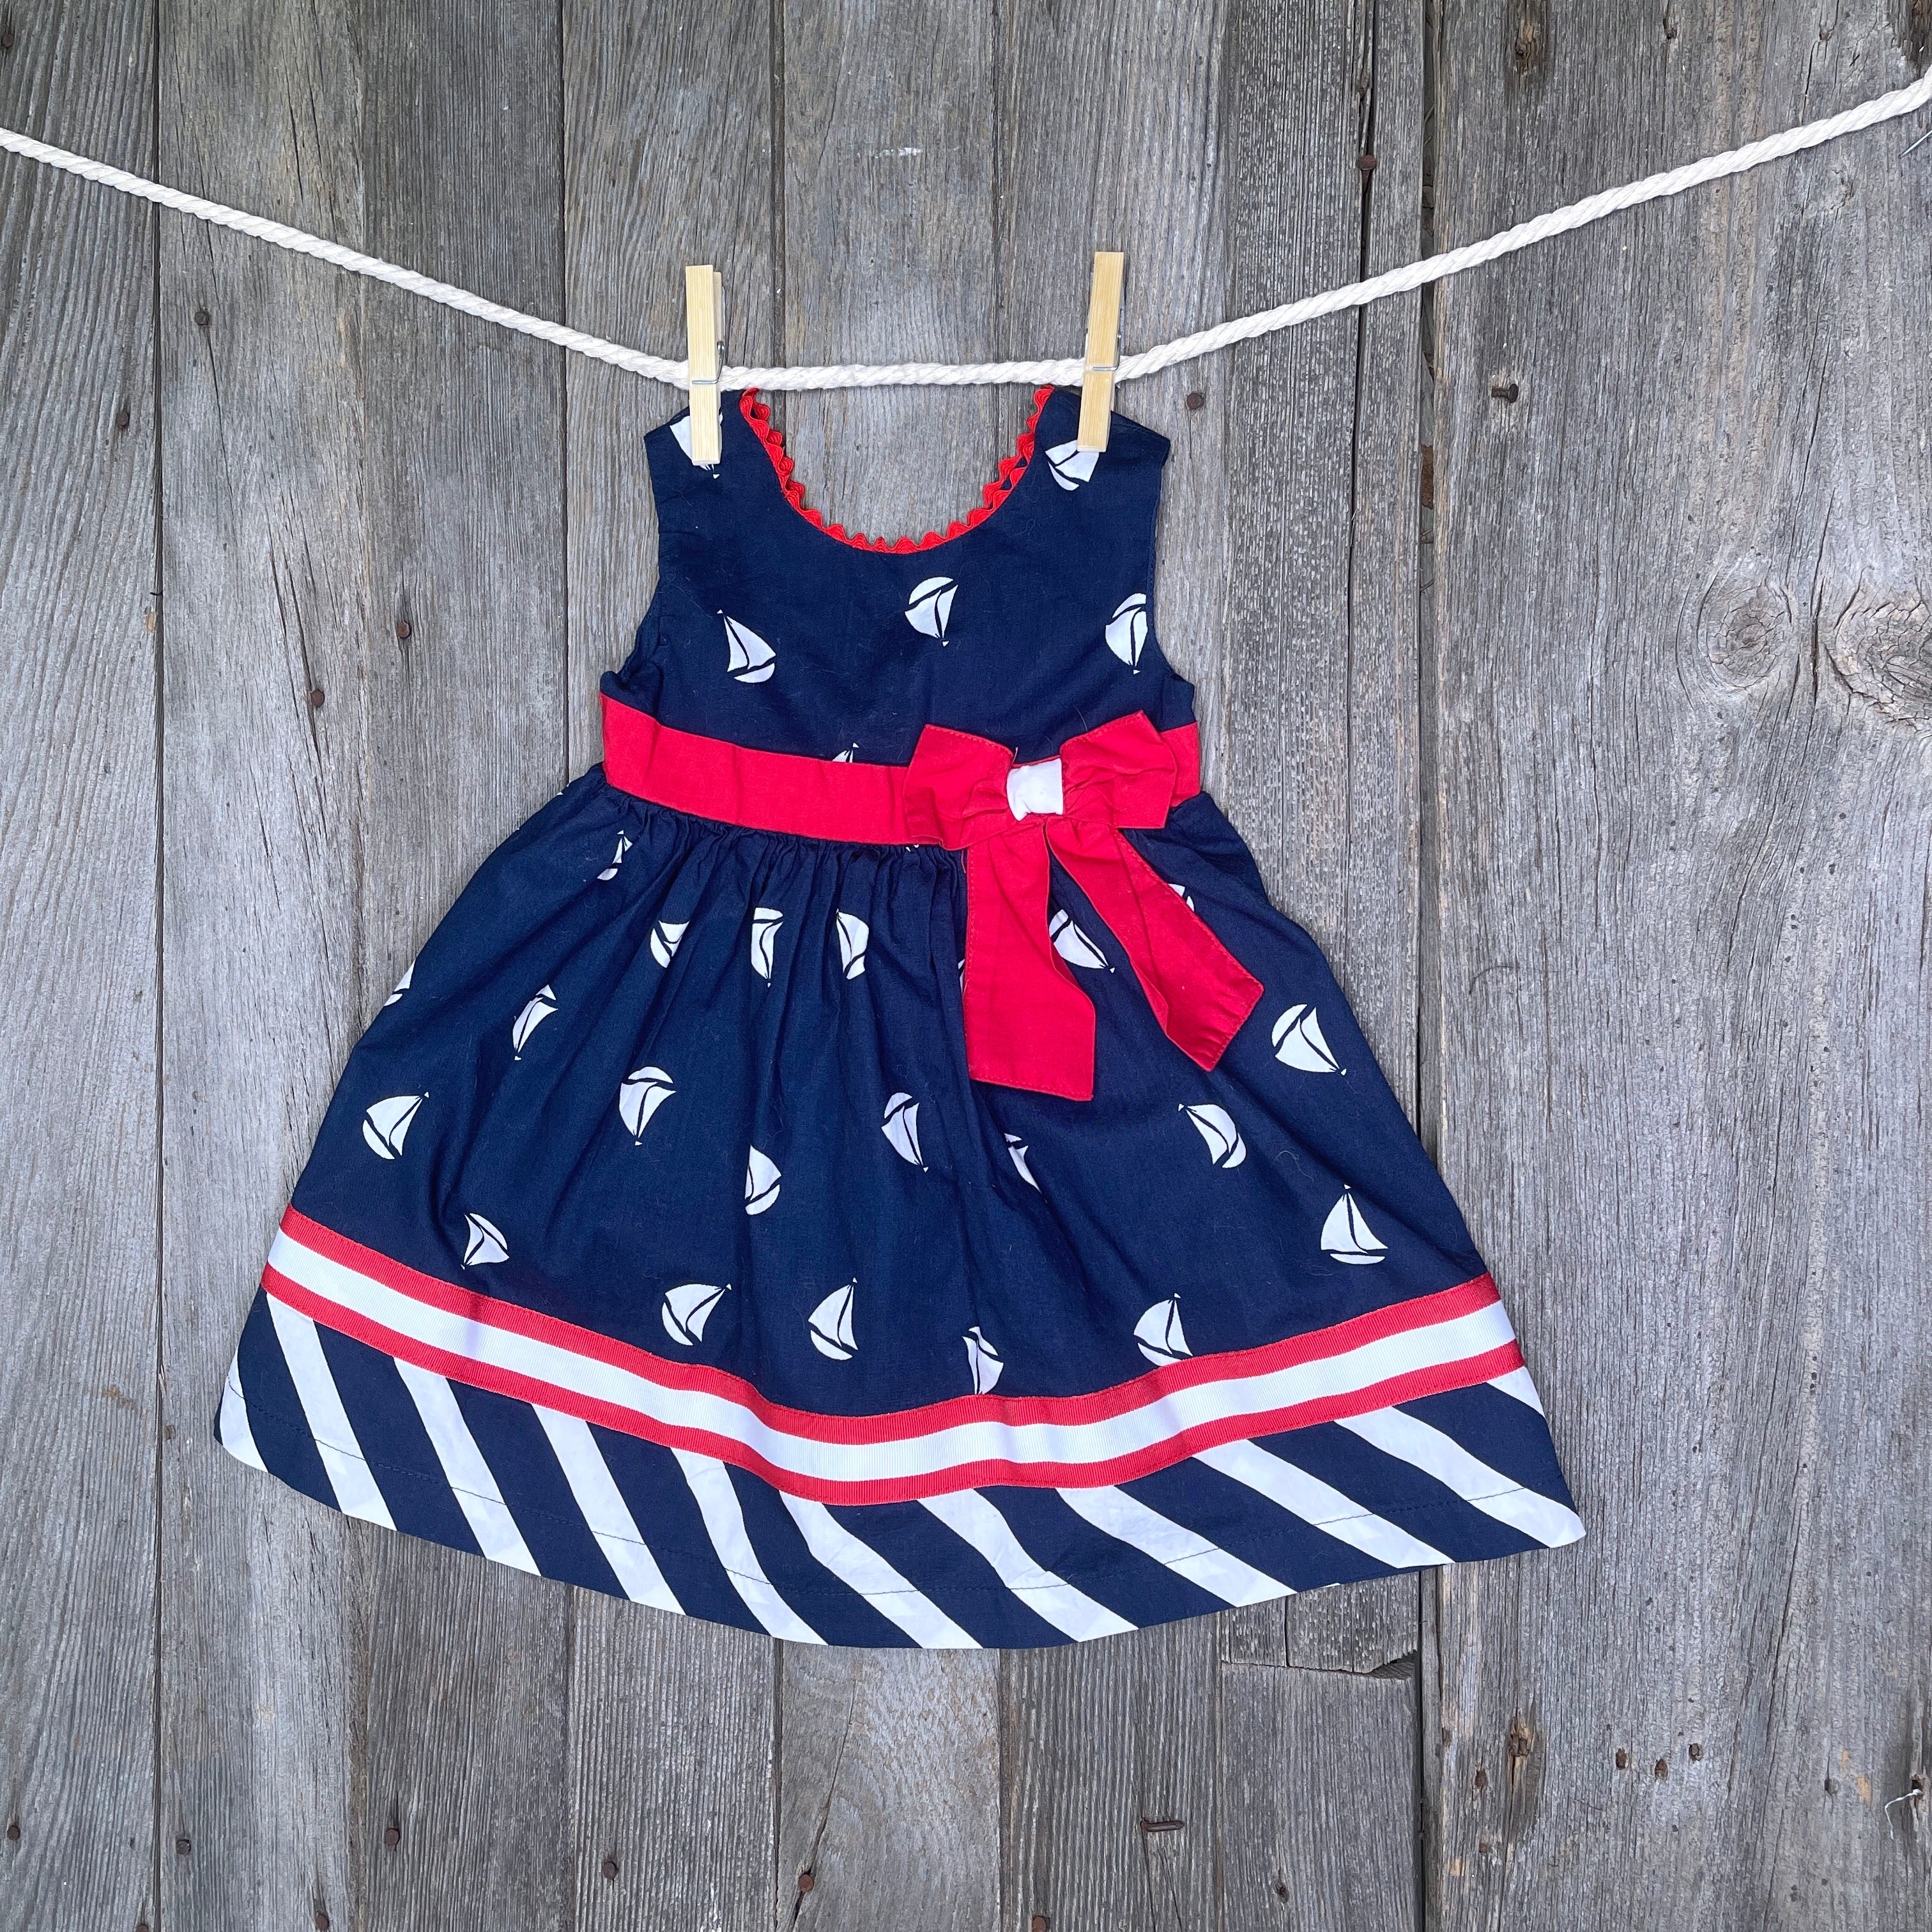 One Piece Outfit Dress 12-18 Months BCP